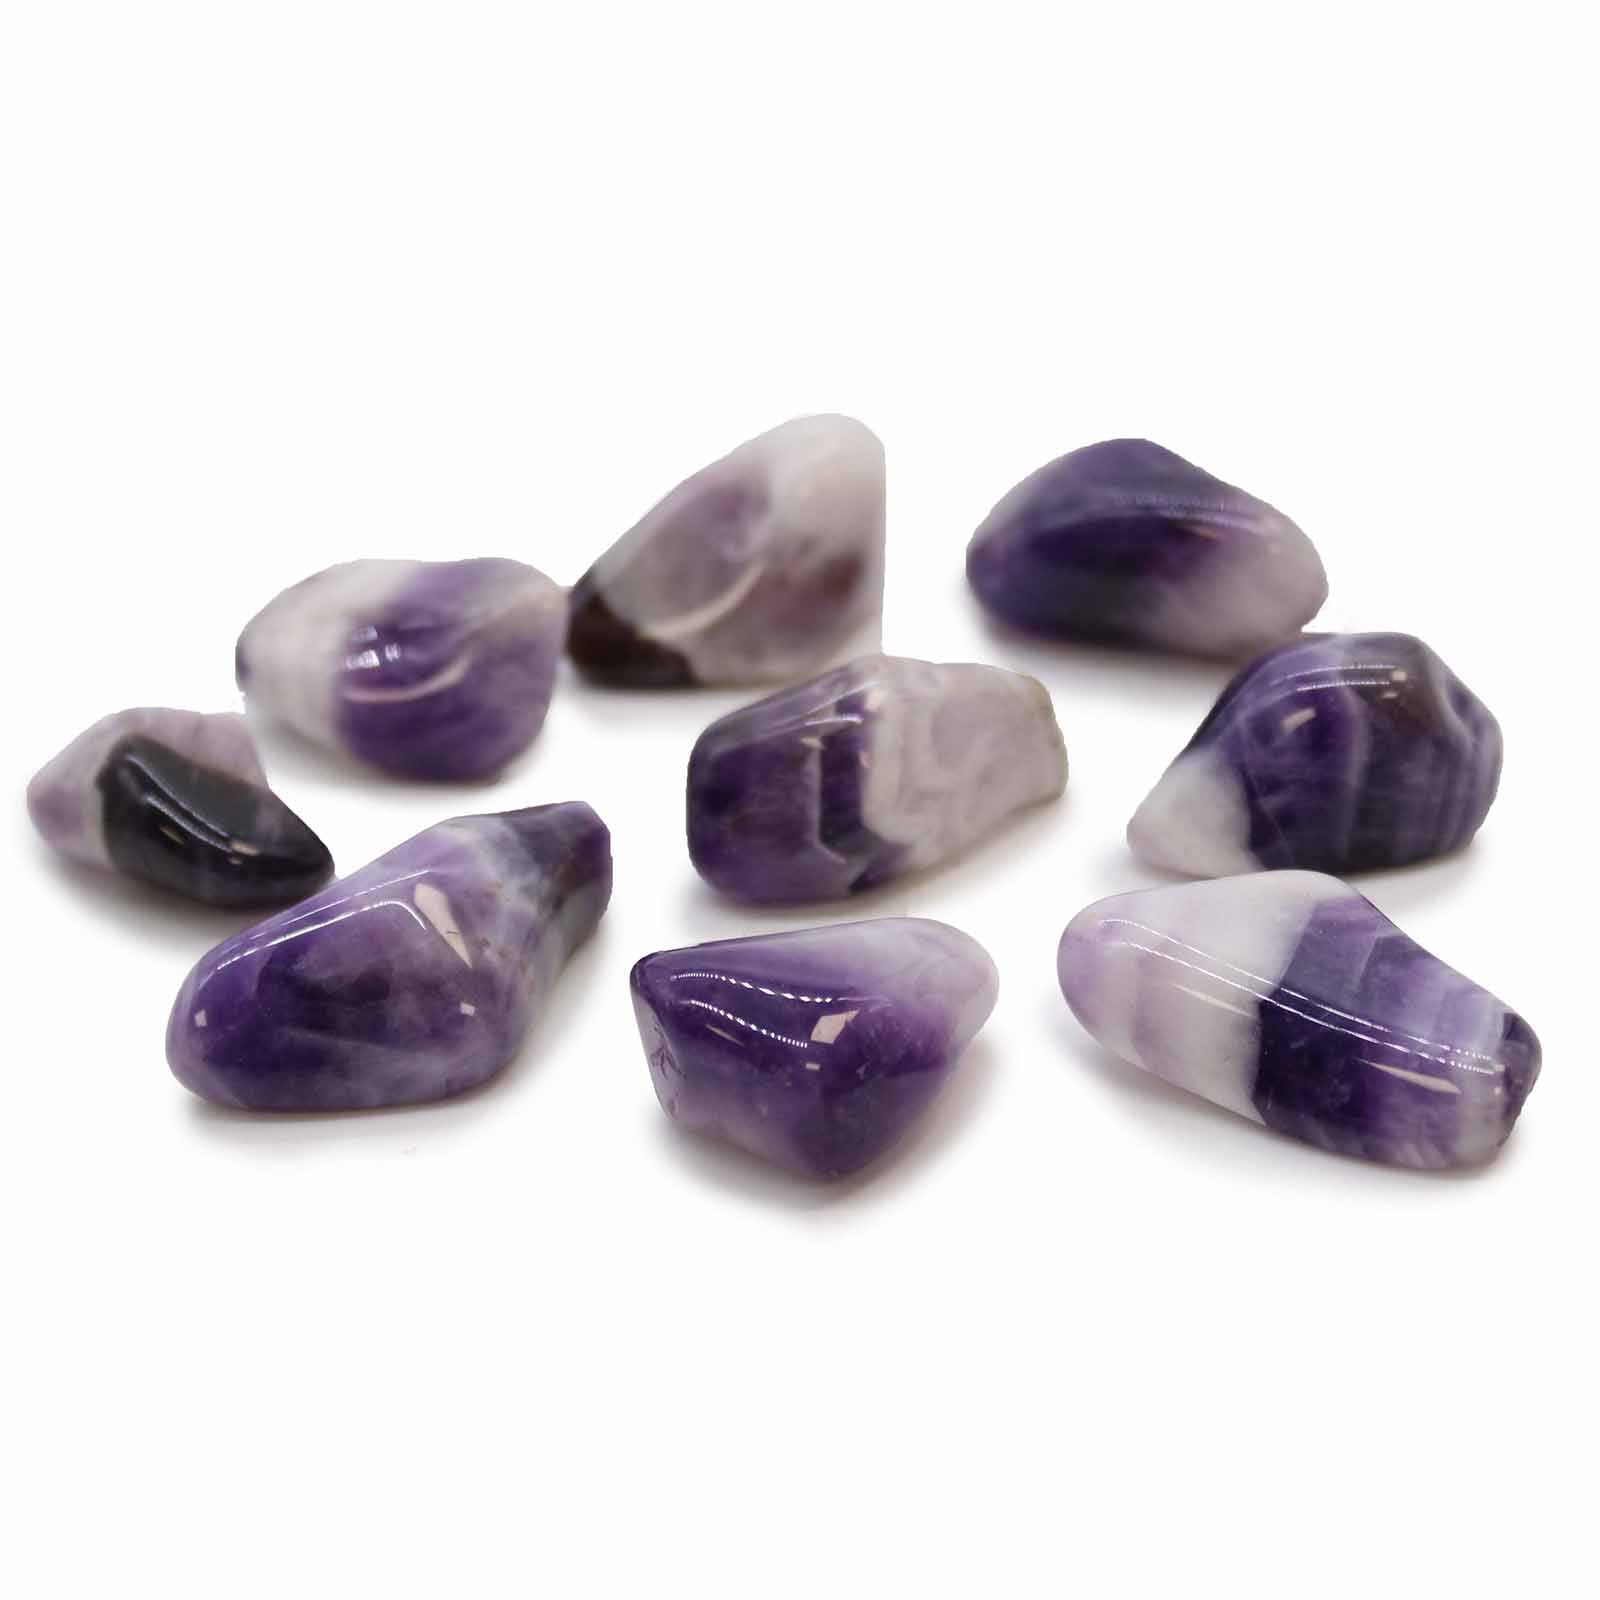 View M Tumble Stones Amethyst Banded Grade B information